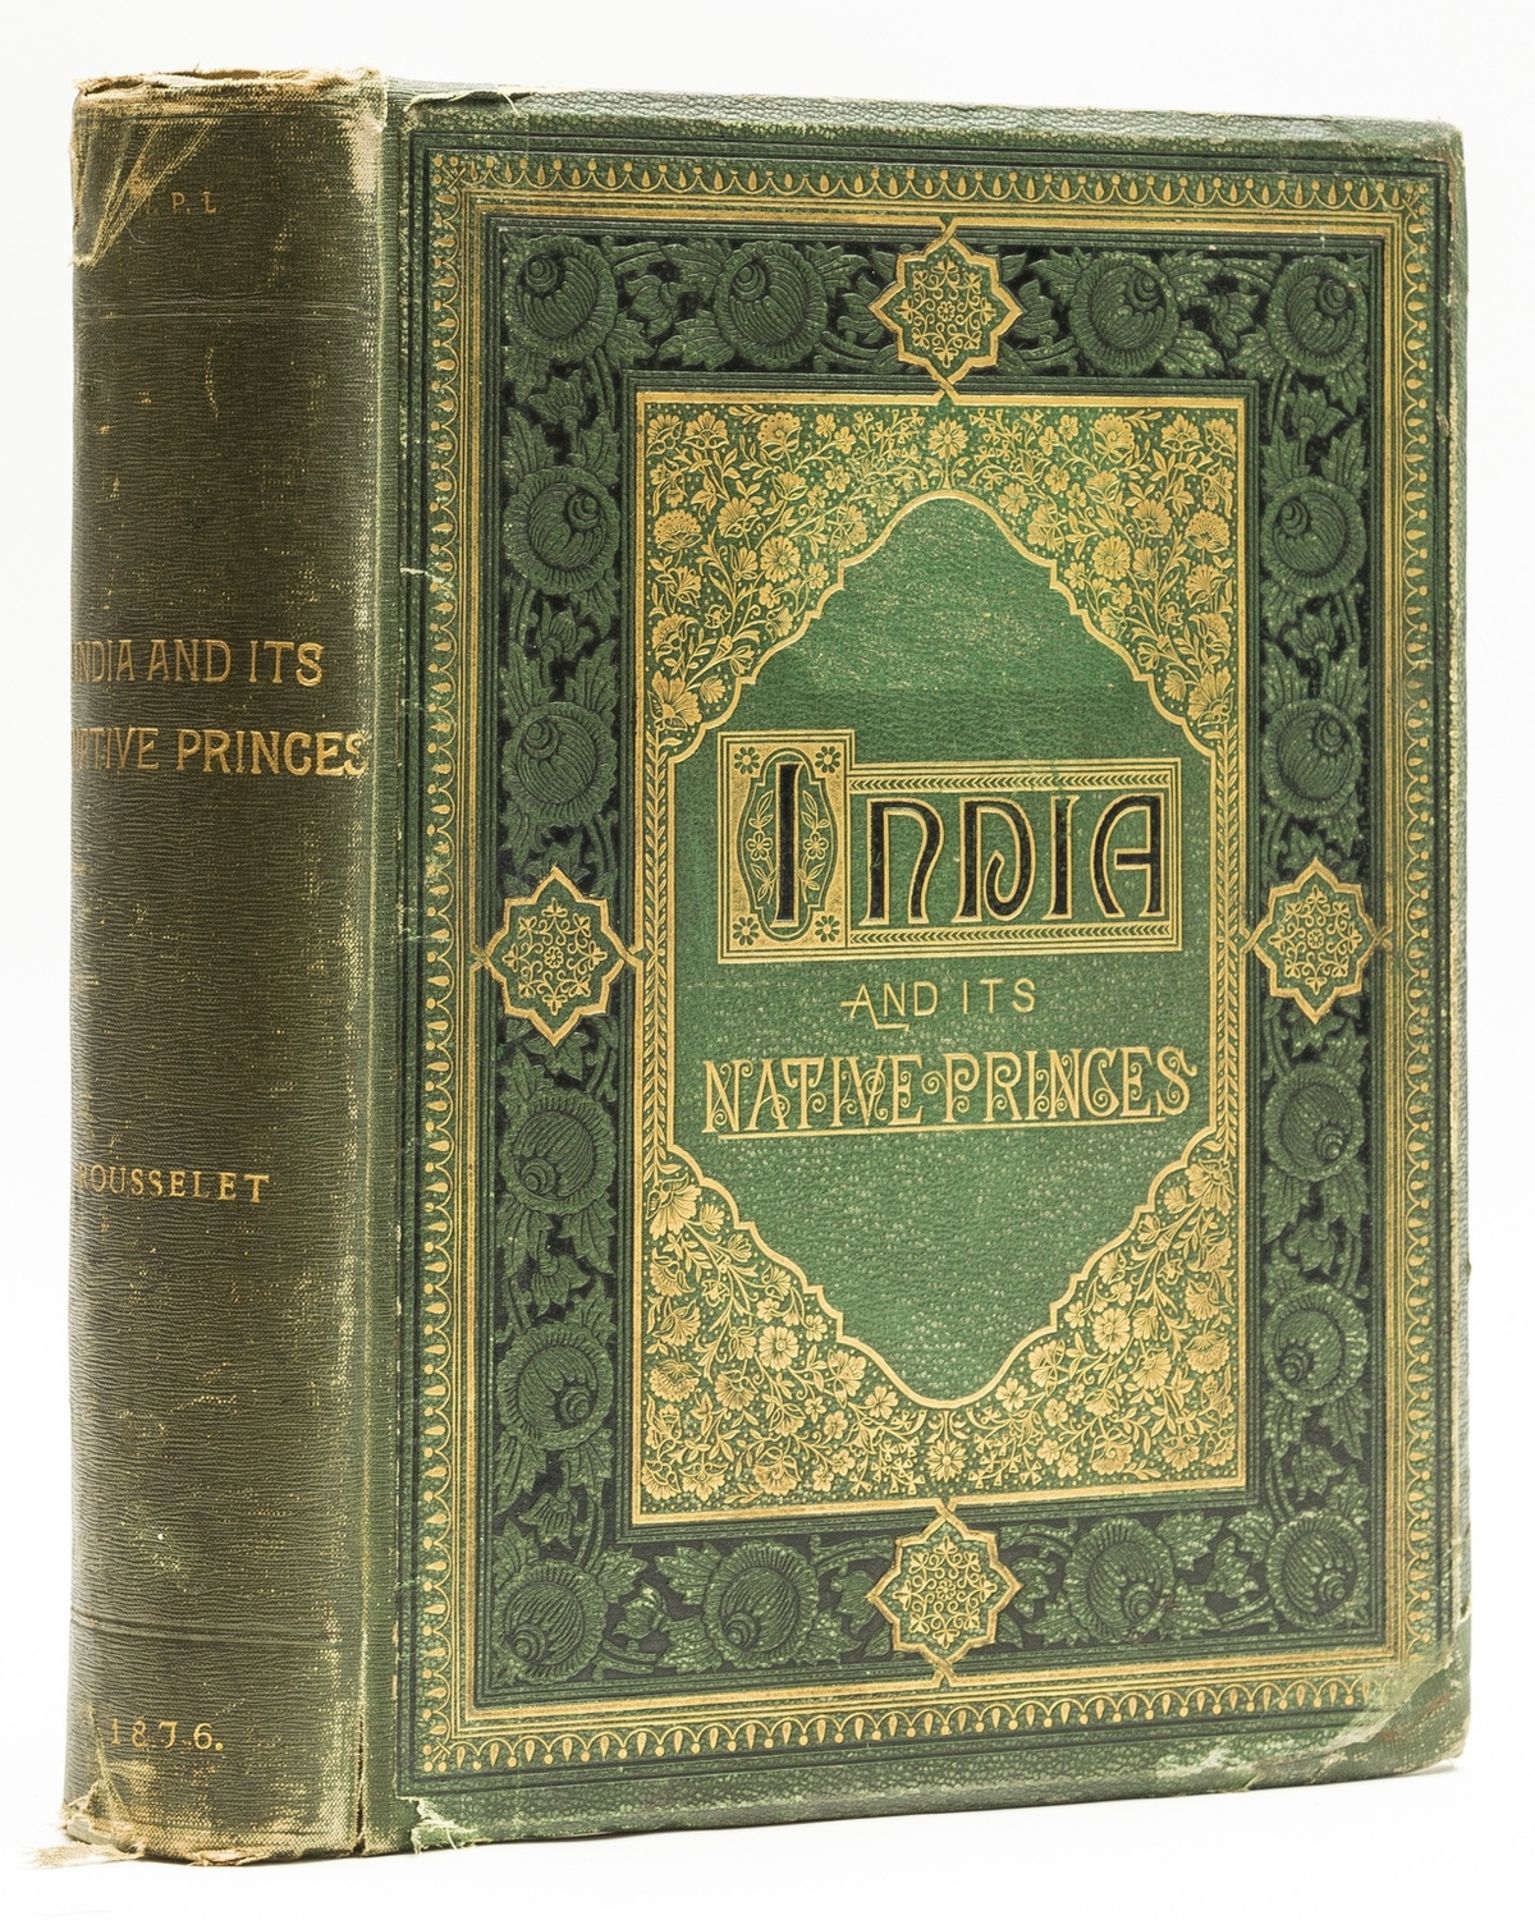 India.- Rousselet (Louis) India and its Native Princes: Travels in Central India, 1876.